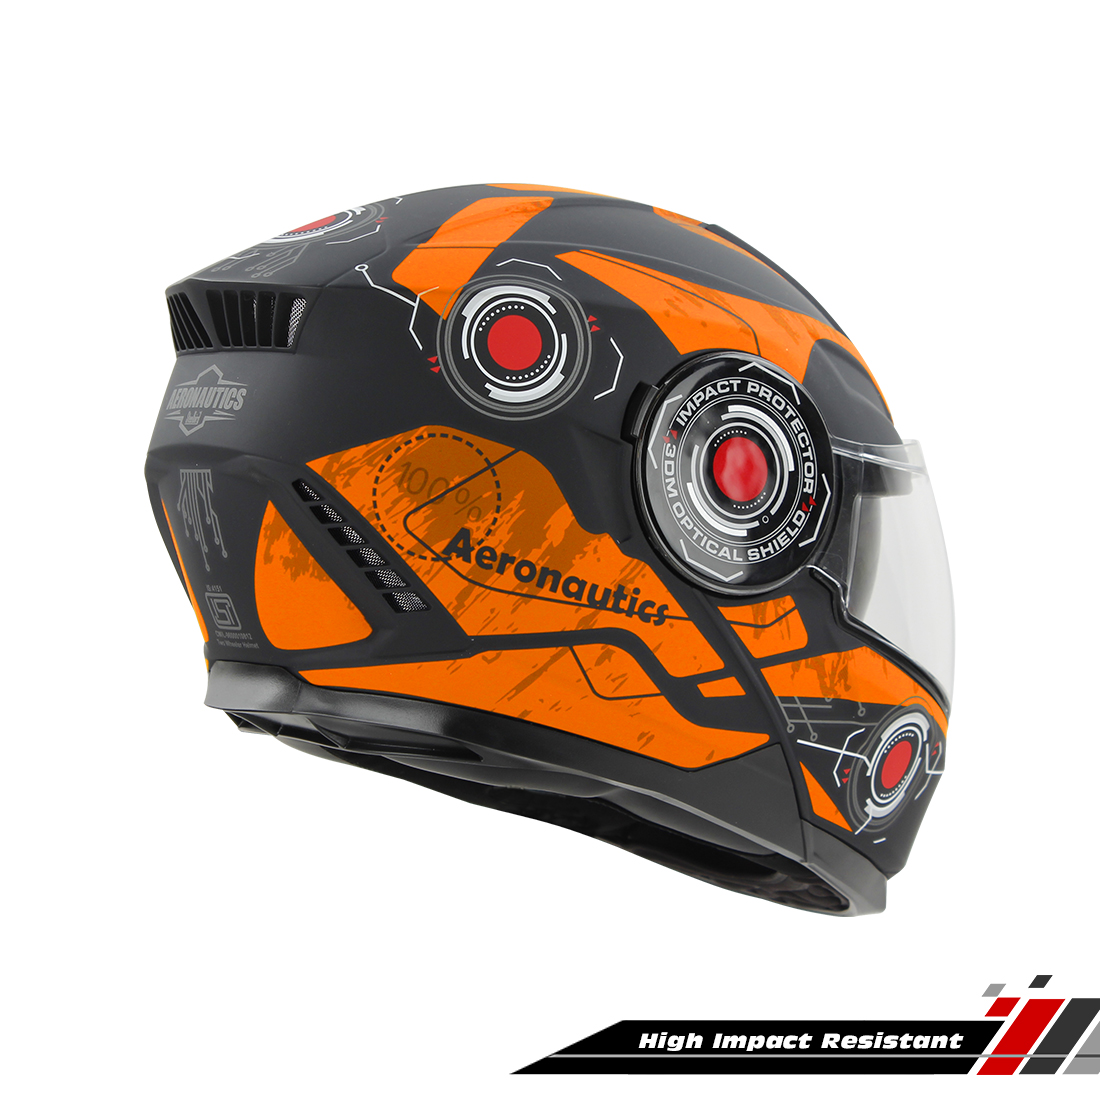 Steelbird SBH-40 Cyber ISI Certified Full Face Graphic Helmet For Men And Women With Inner Sun Shield (Glossy Black Orange)